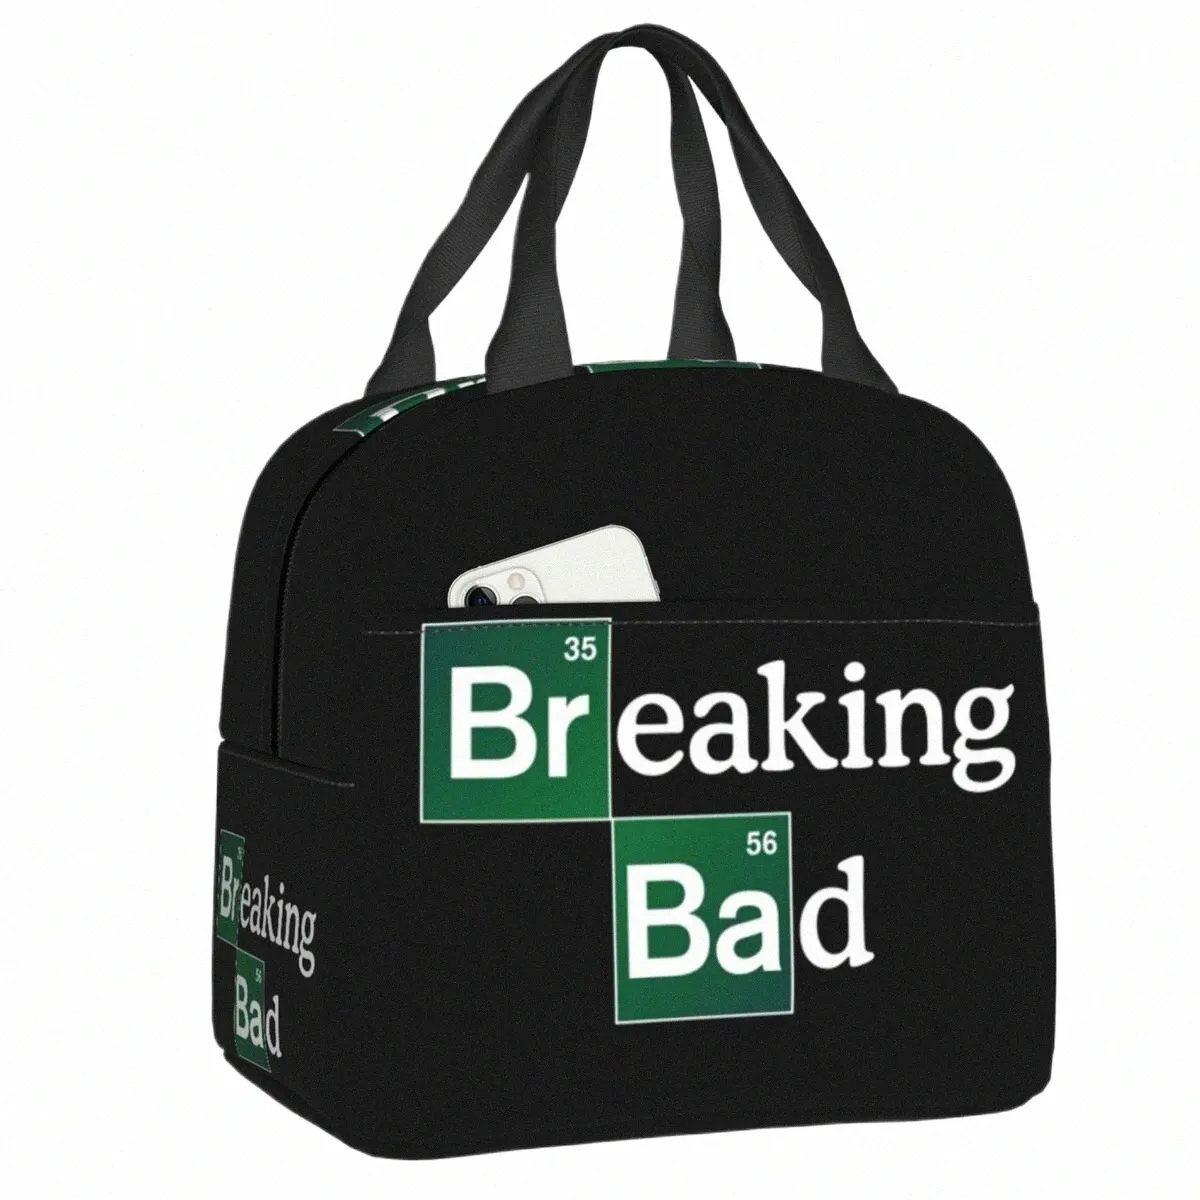 Breaking Bad Isulater Dann Sac pour femmes imperméables Heisenberg Color Thermal Lunch Tote Box School Work Picnic Food Sacs U260 #